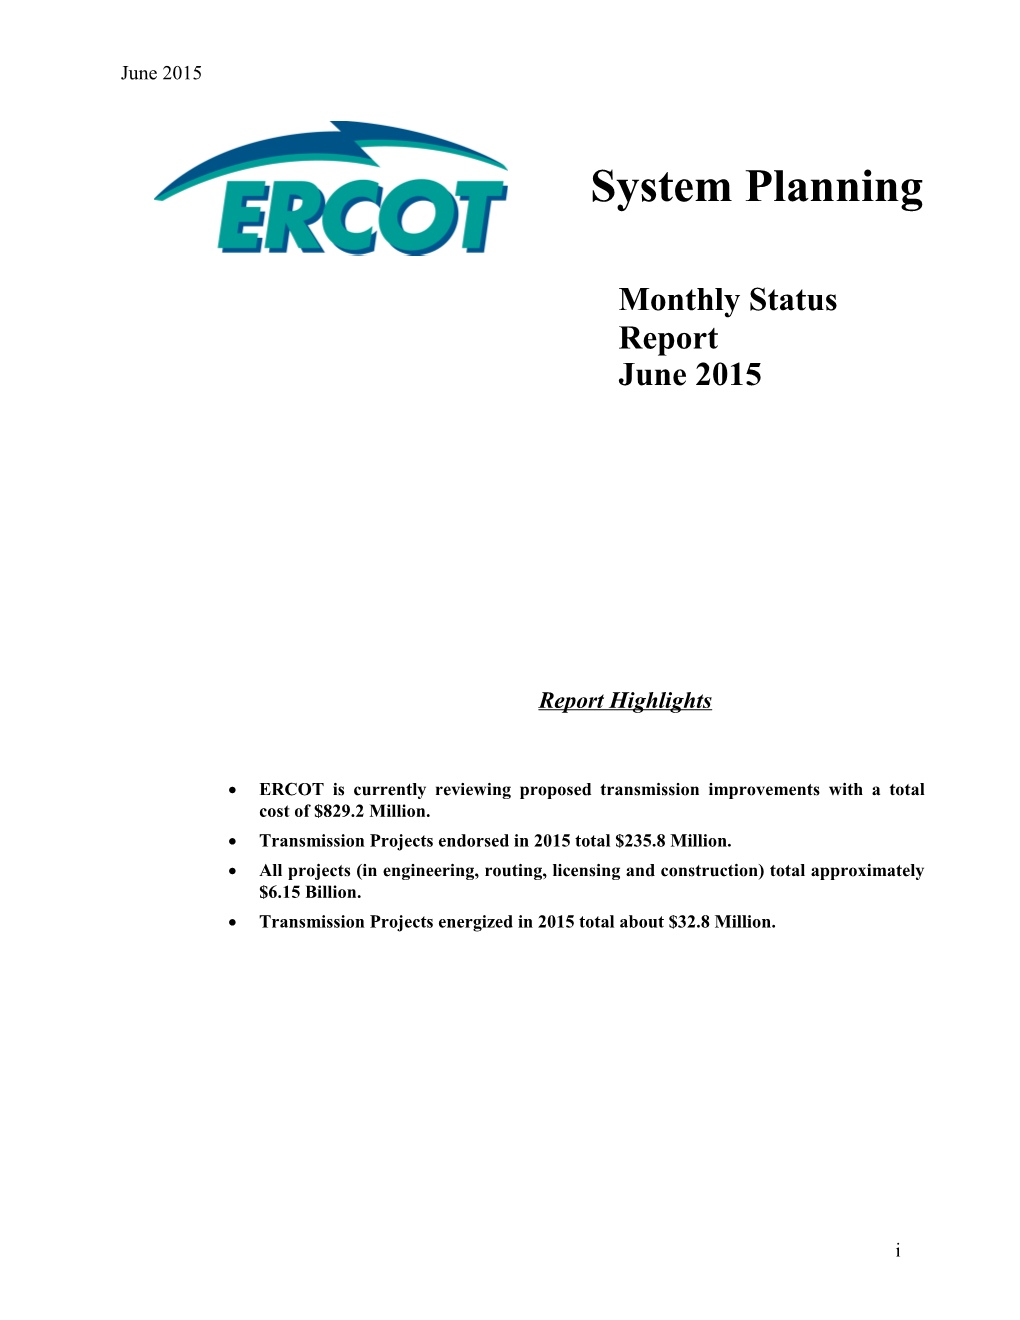 ERCOT Is Currently Reviewing Proposed Transmission Improvements with a Total Cost Of